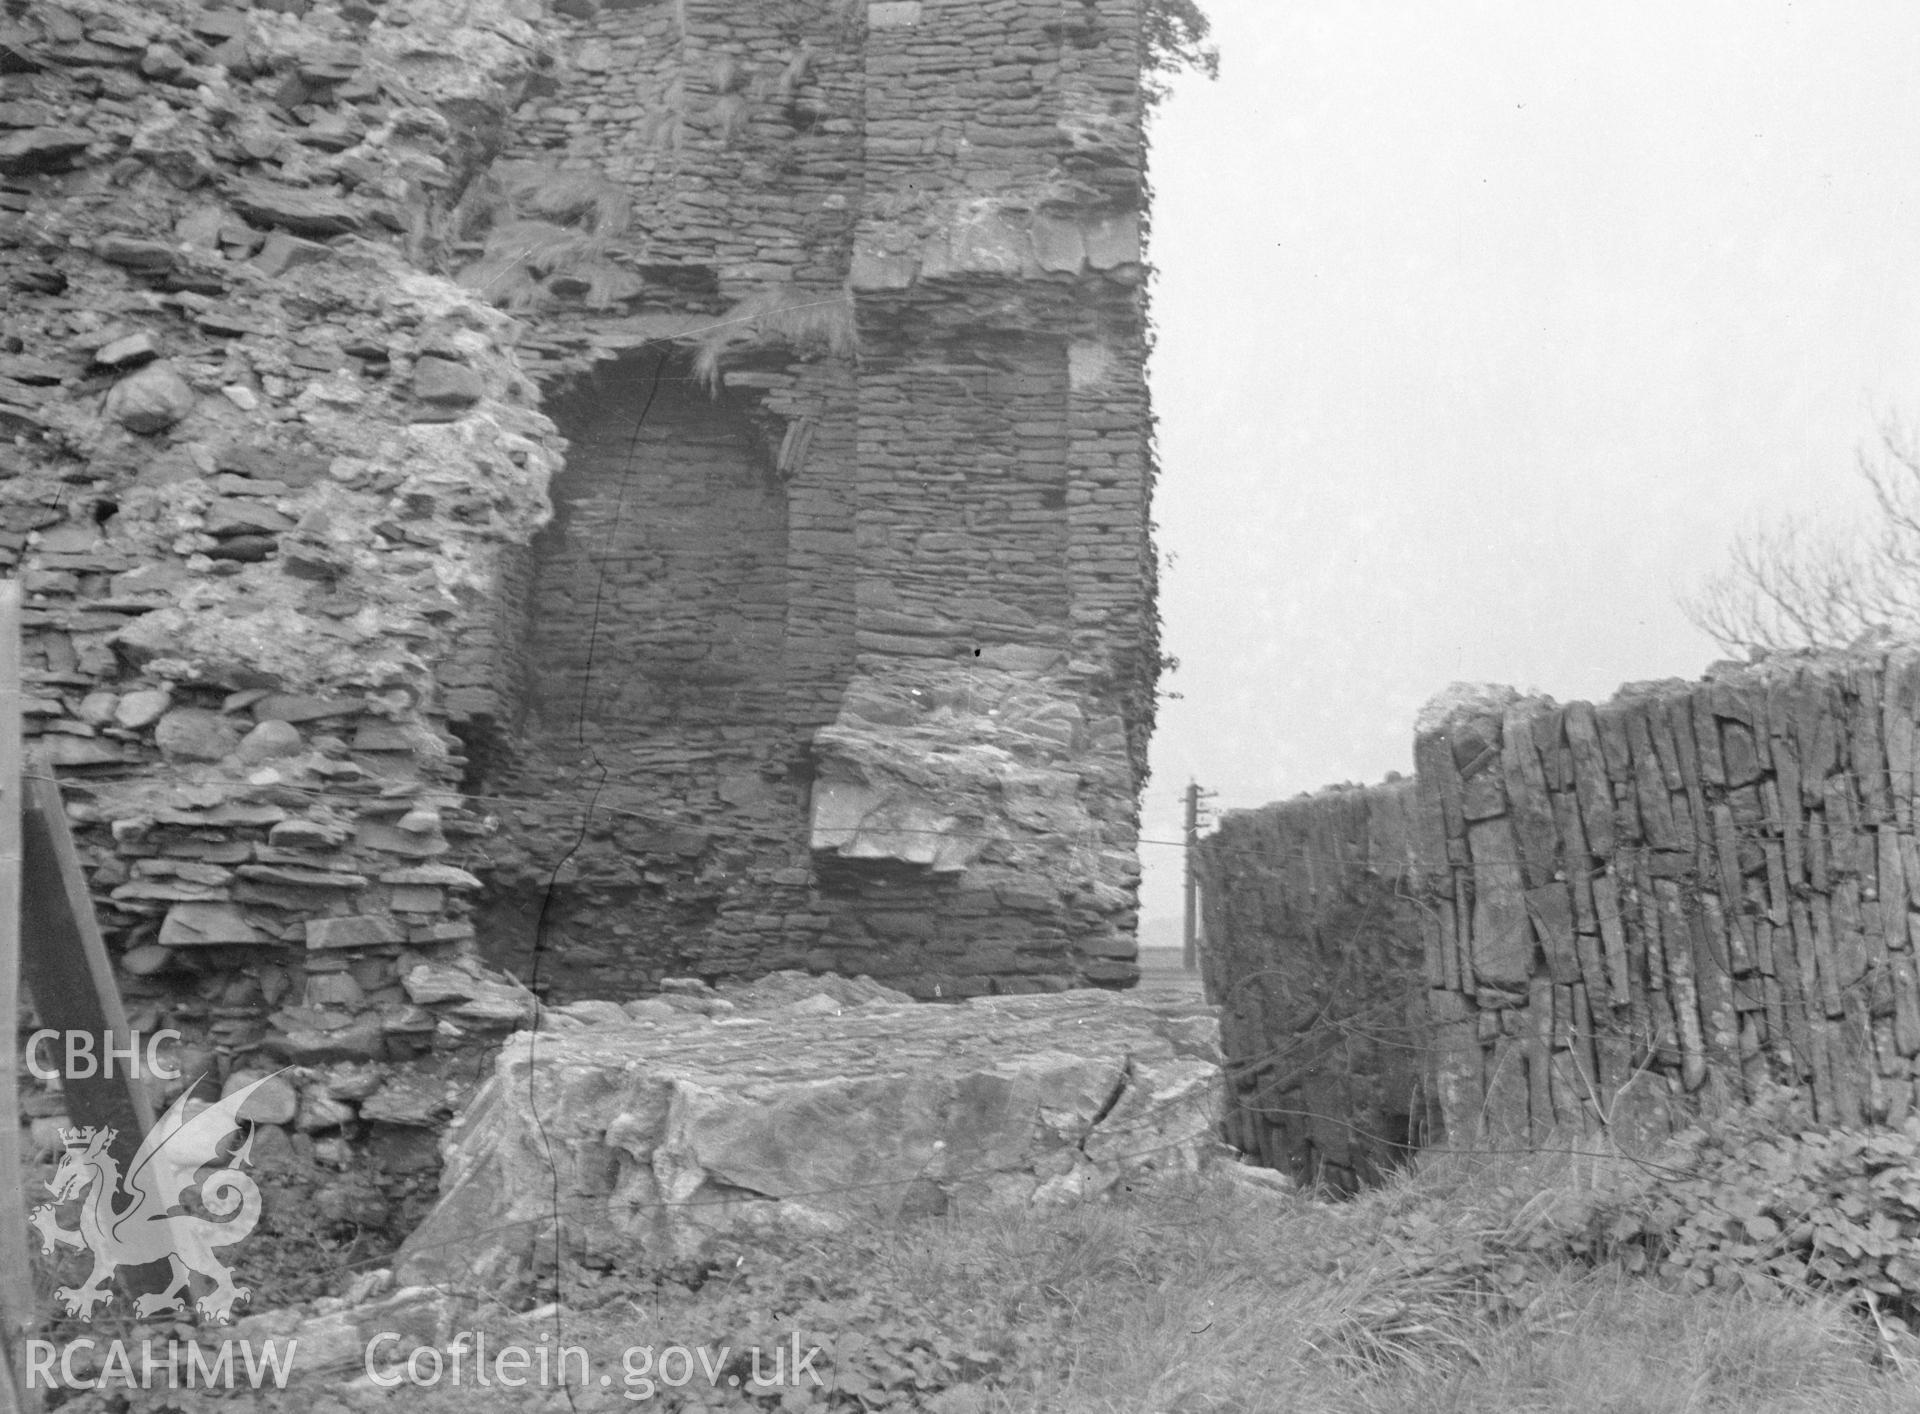 Digital copy of a nitrate negative showing Loughor Castle.